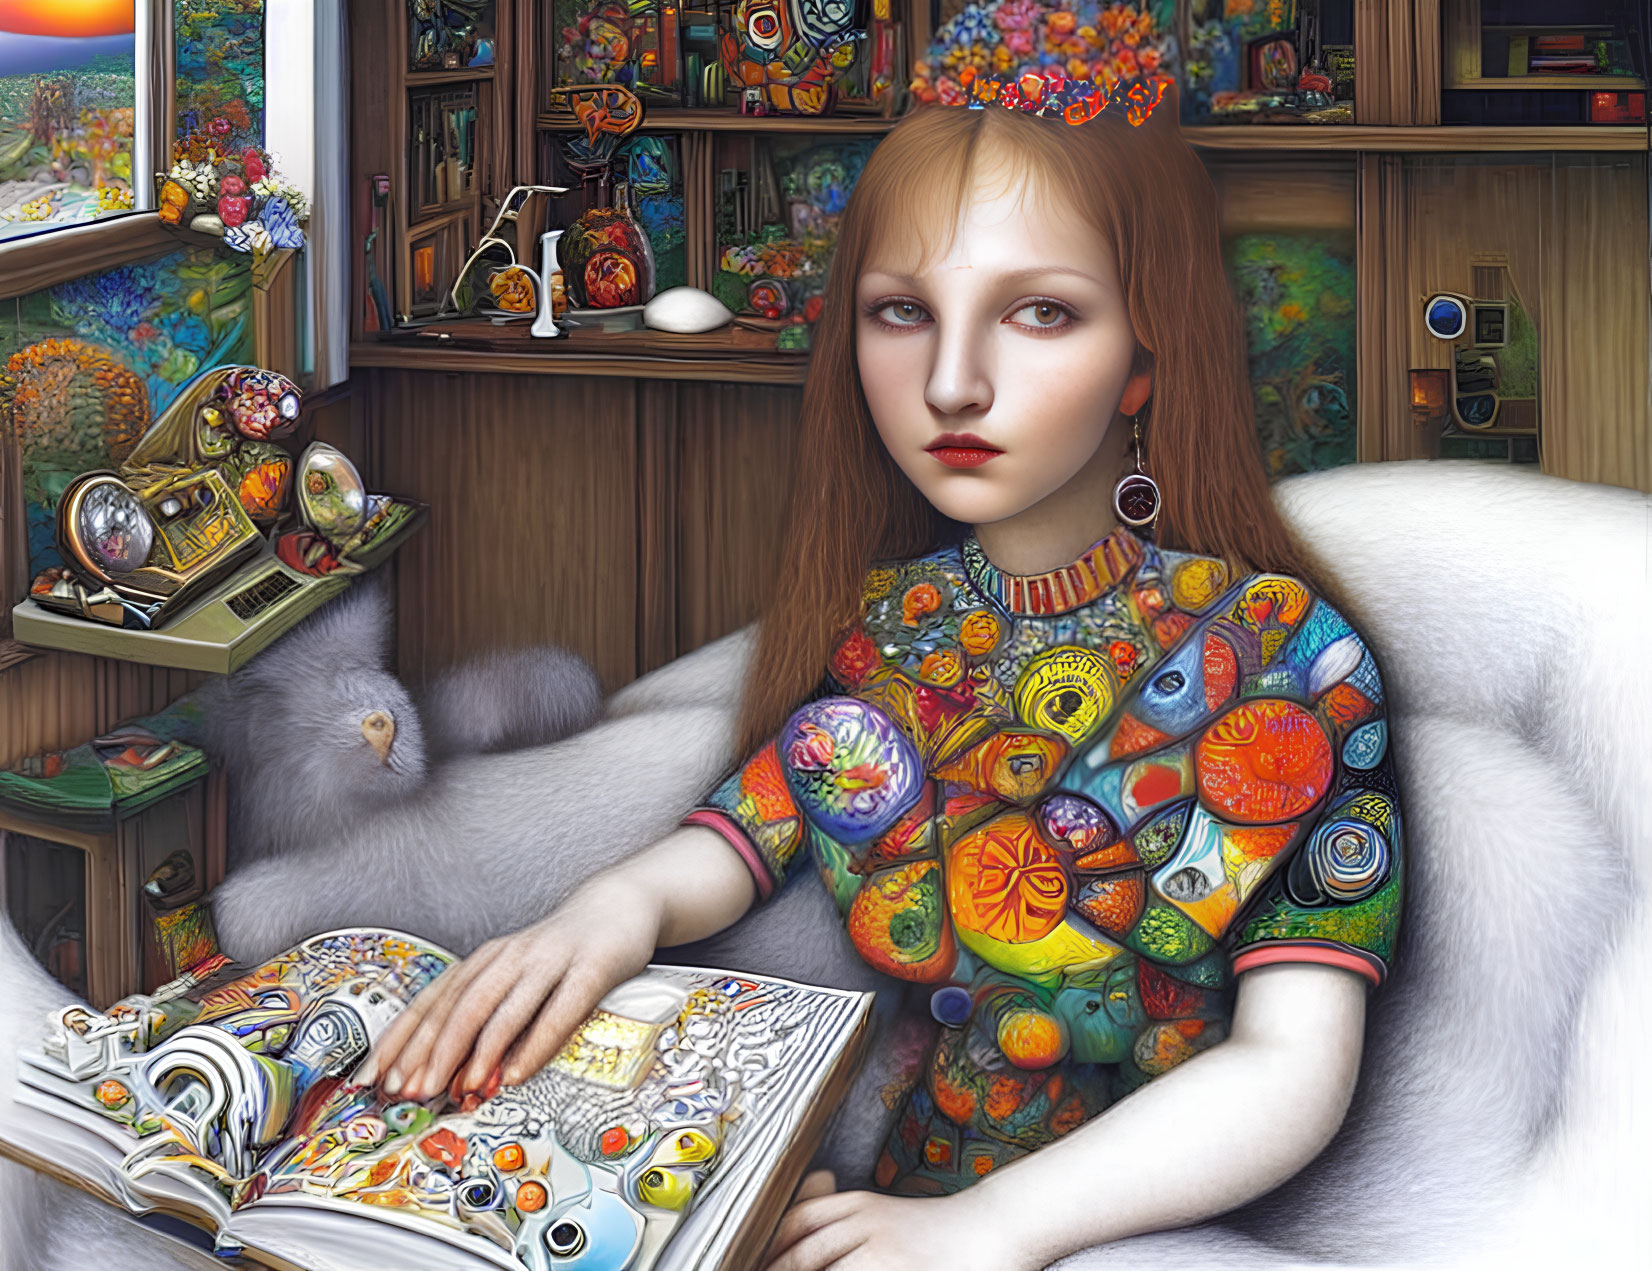 Vibrant surreal painting: Red-haired girl reading with cat in colorful room